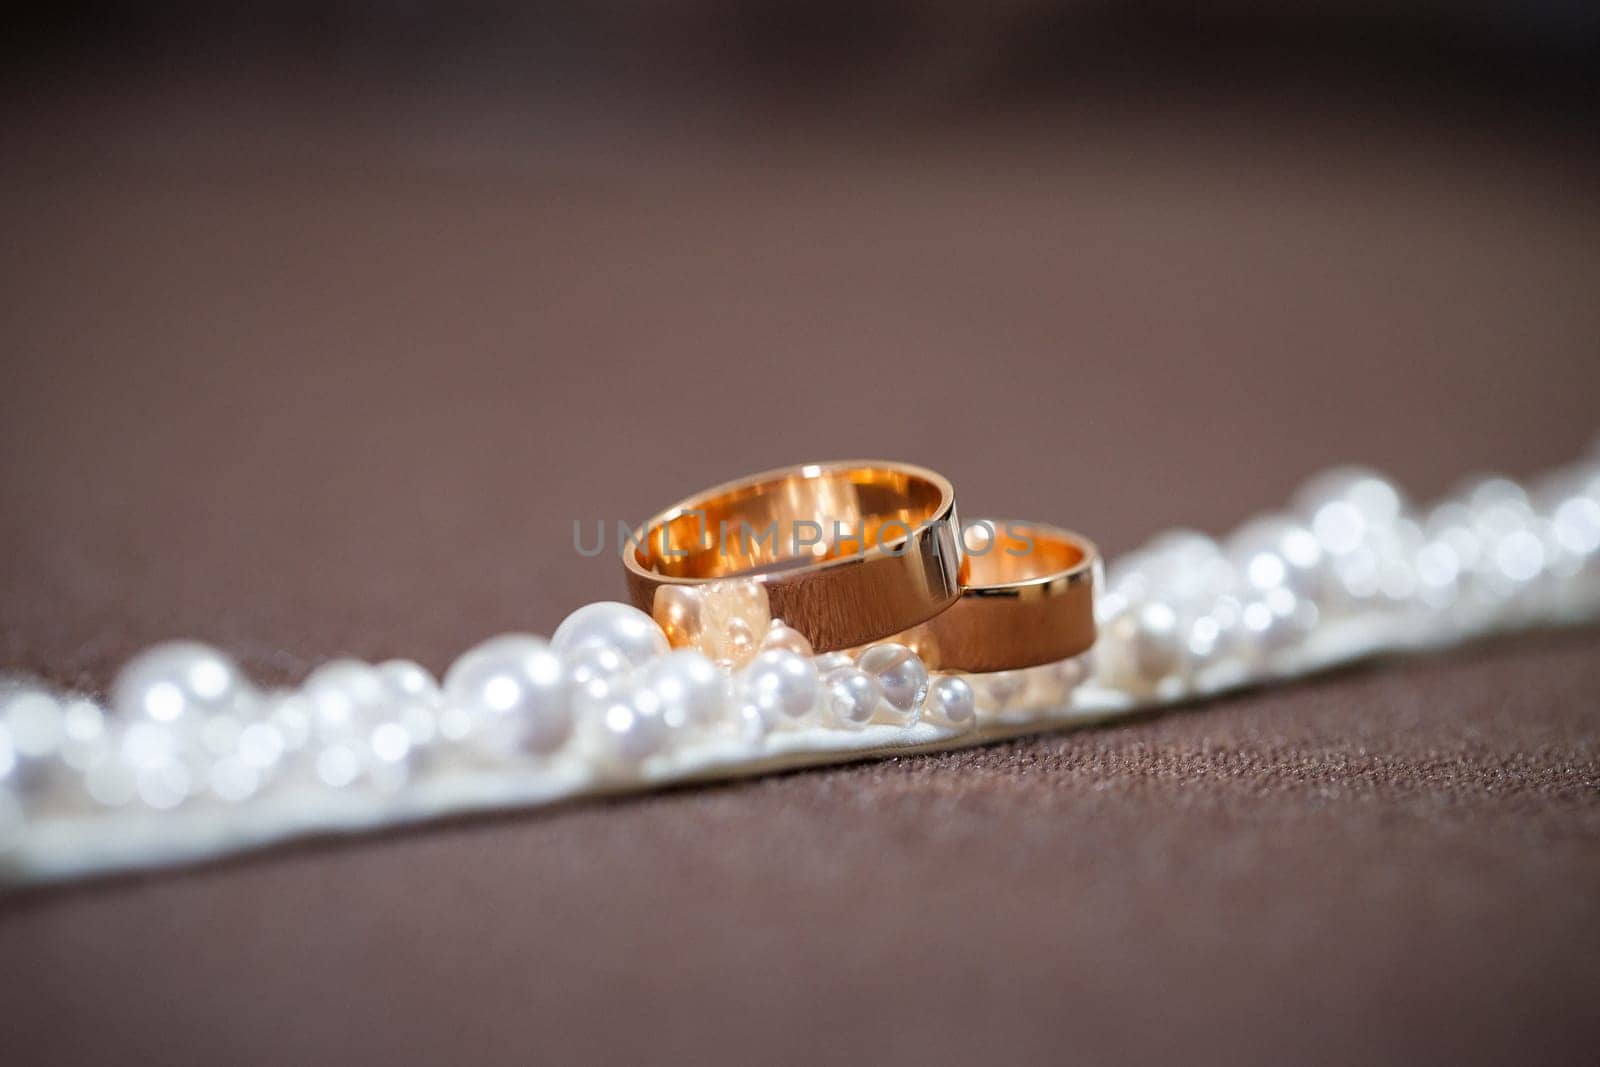 Golden wedding rings for newlyweds